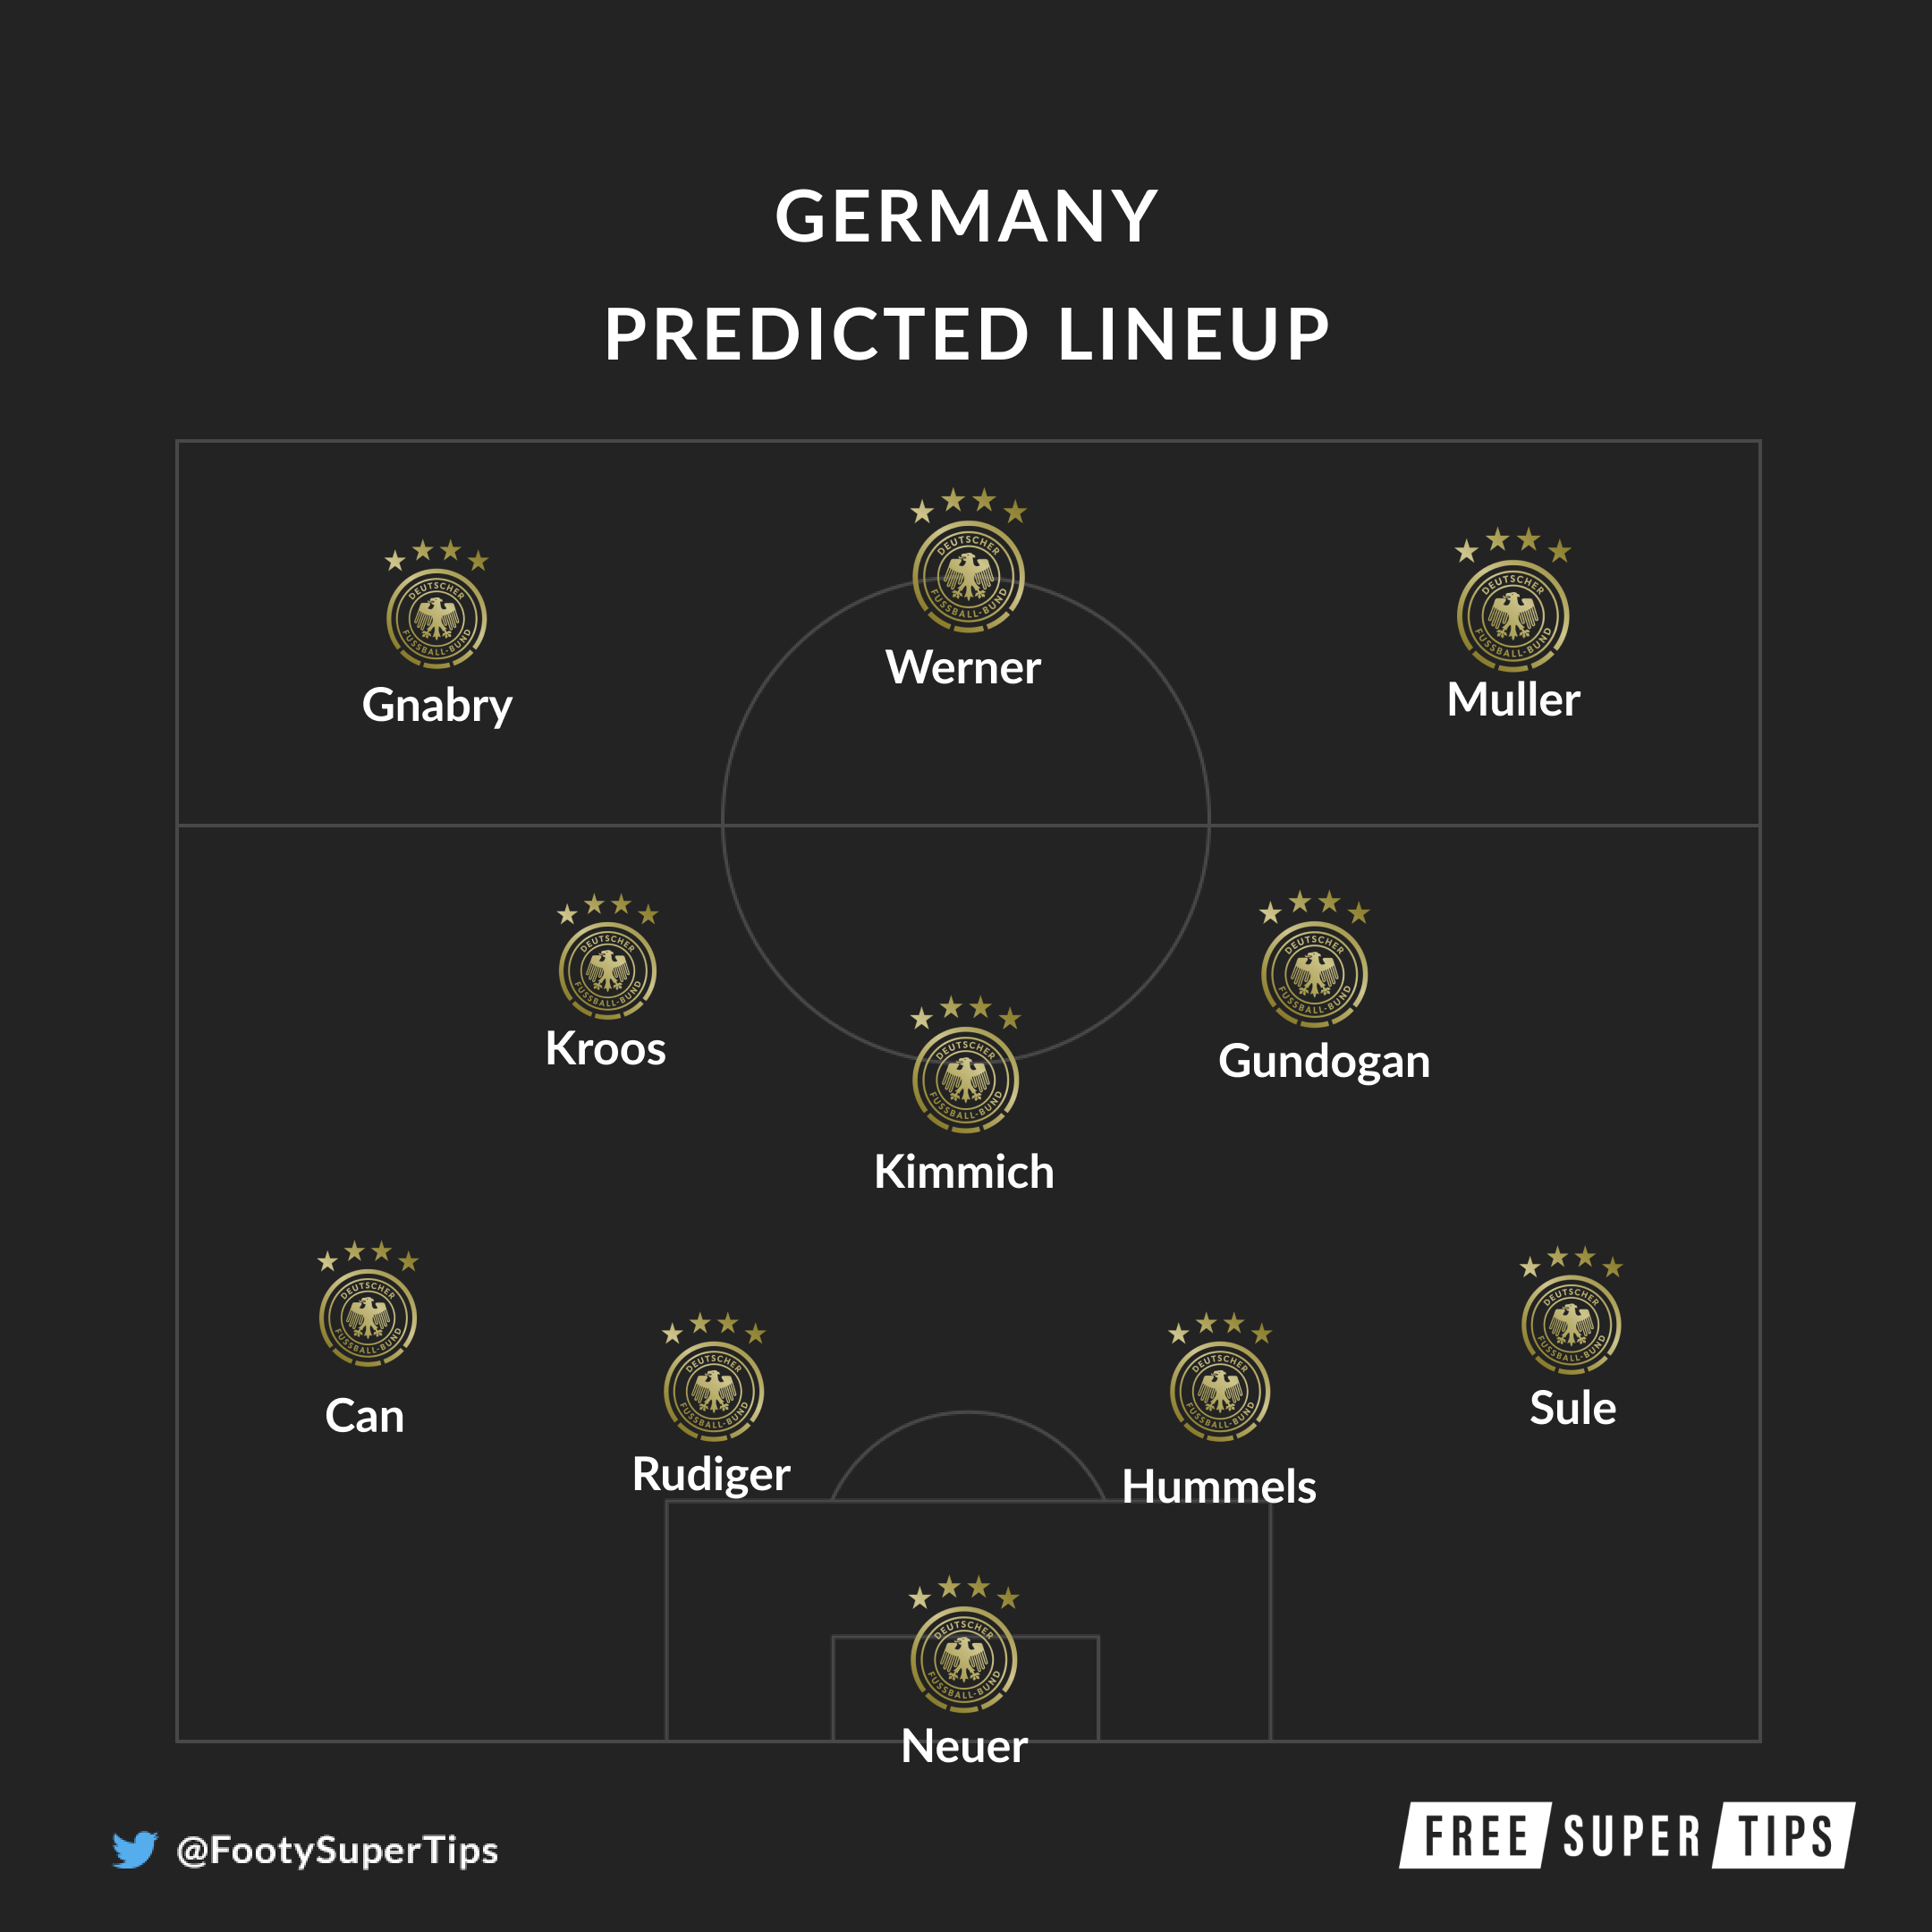 Germany predicted lineup